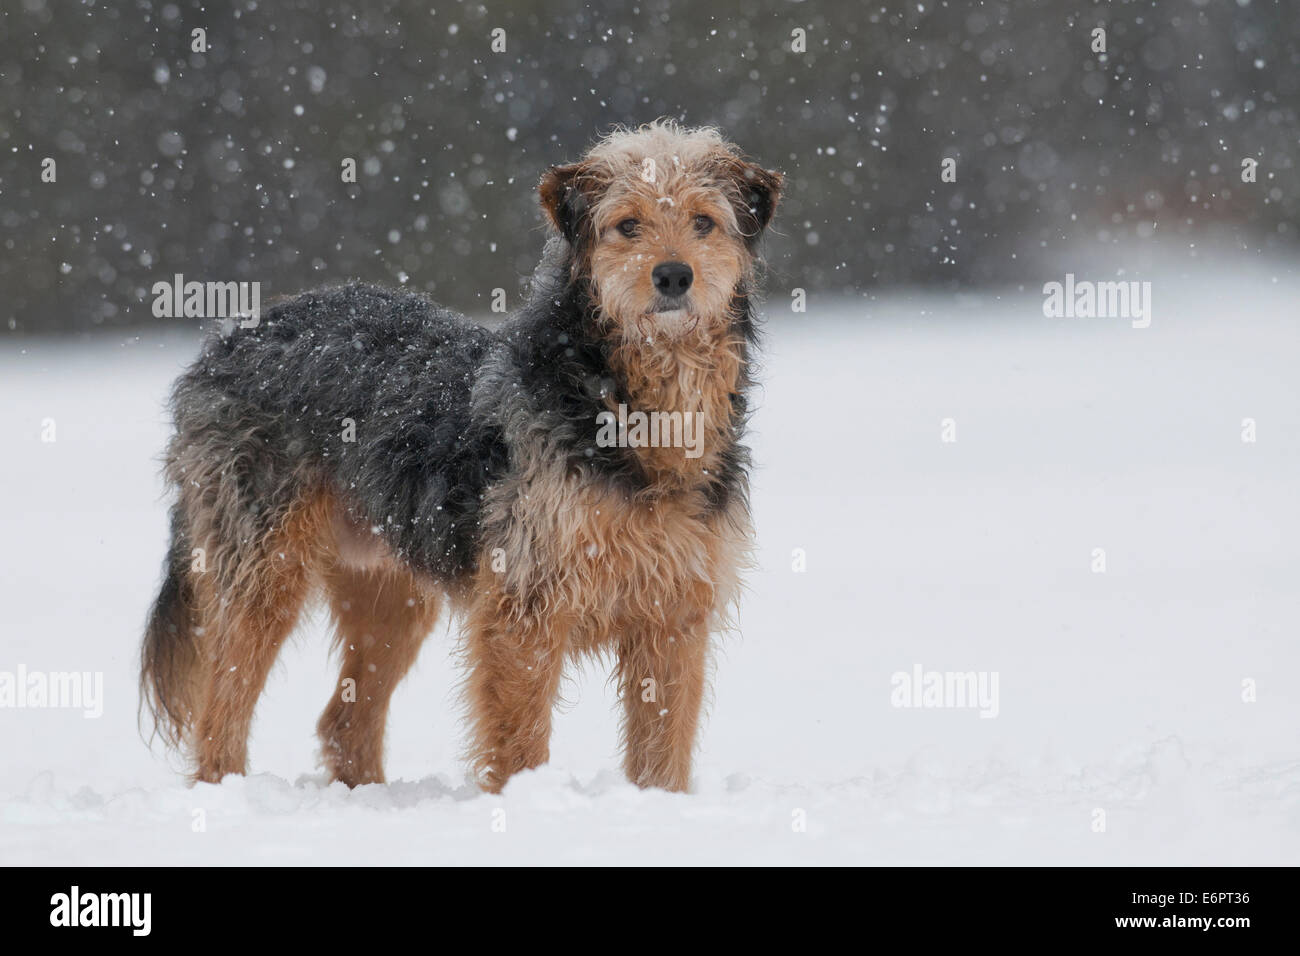 Bosnian Coarse Haired Hound Mongrel Standing In The Snow Stock Photo Alamy